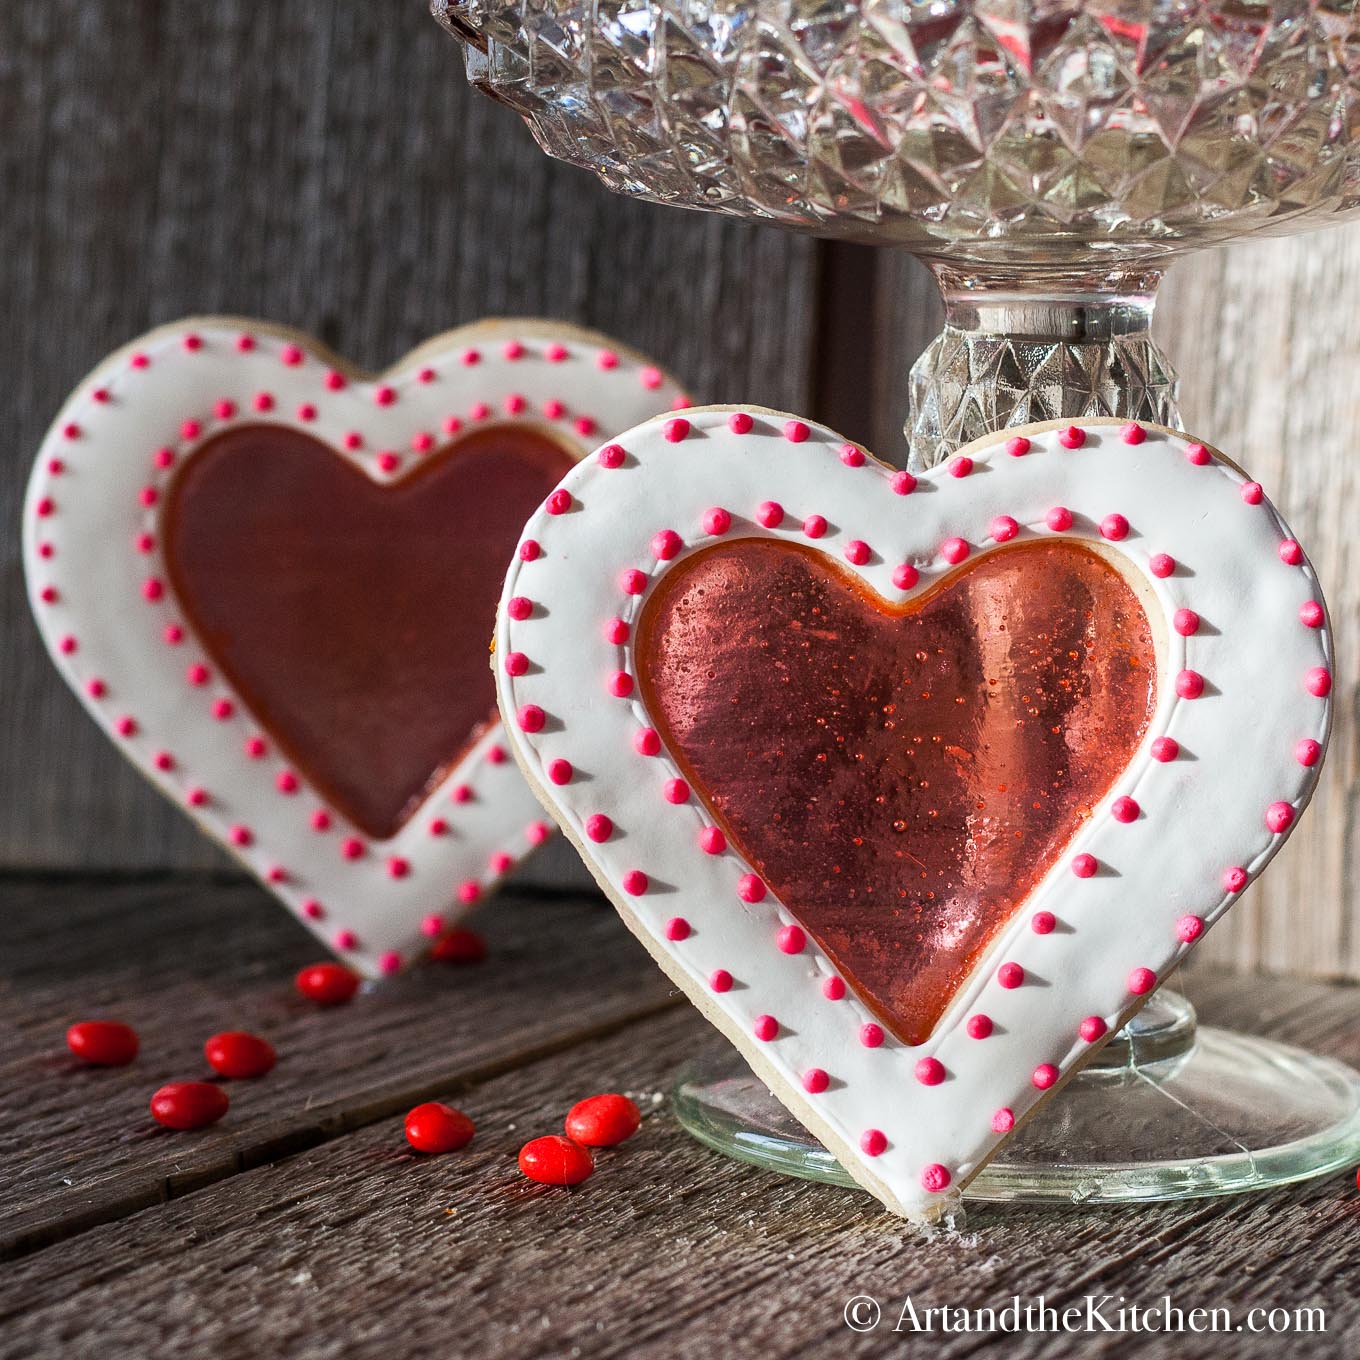 Two heart shaped cookies decorated with a red stained glass looking center.